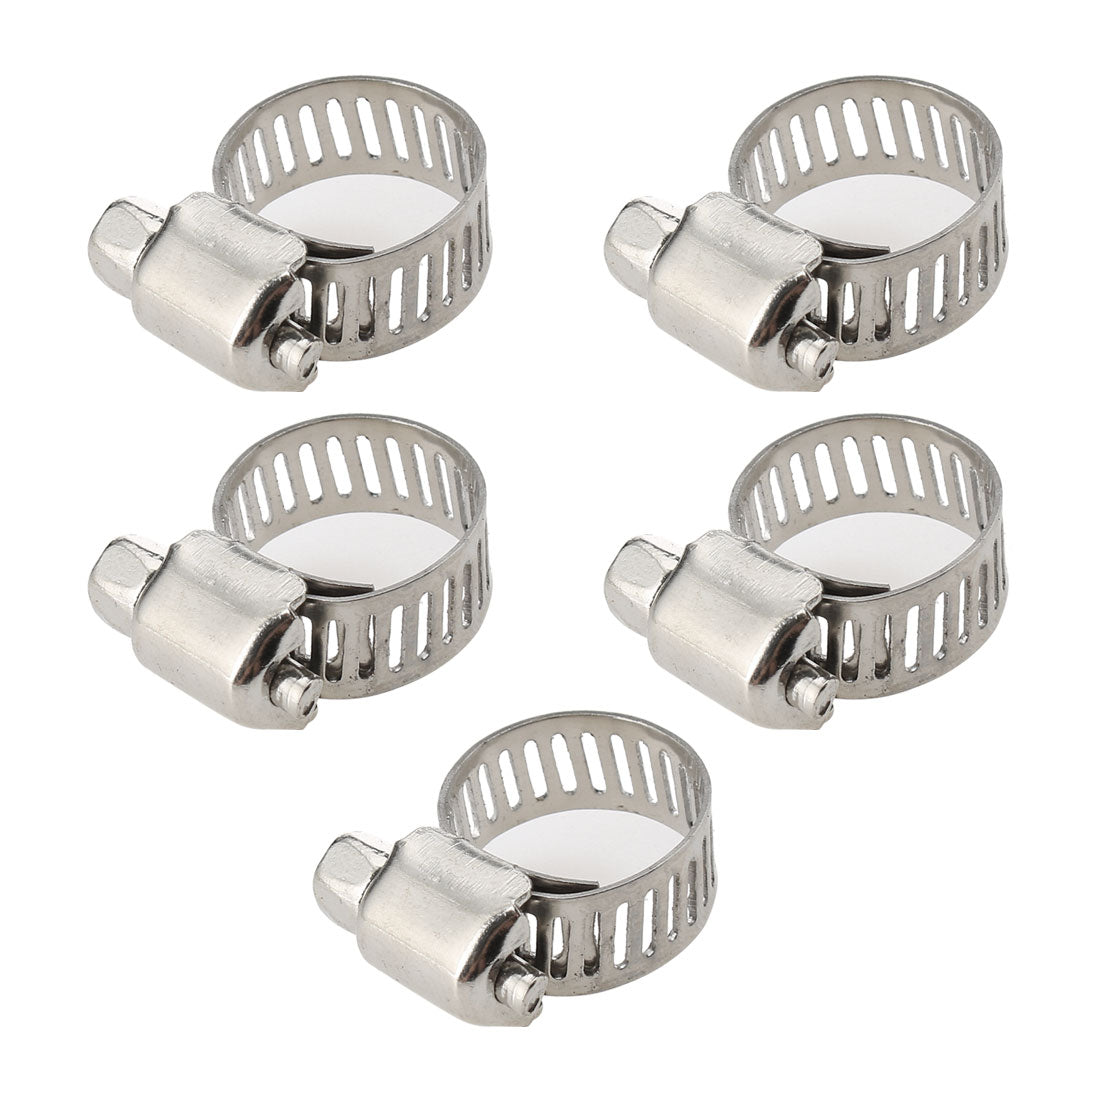 uxcell Uxcell 3/8-5/8 Inch Dia 5pcs 316 Steel Adjustable  Gear Clip Clamping Range Hose Clamp